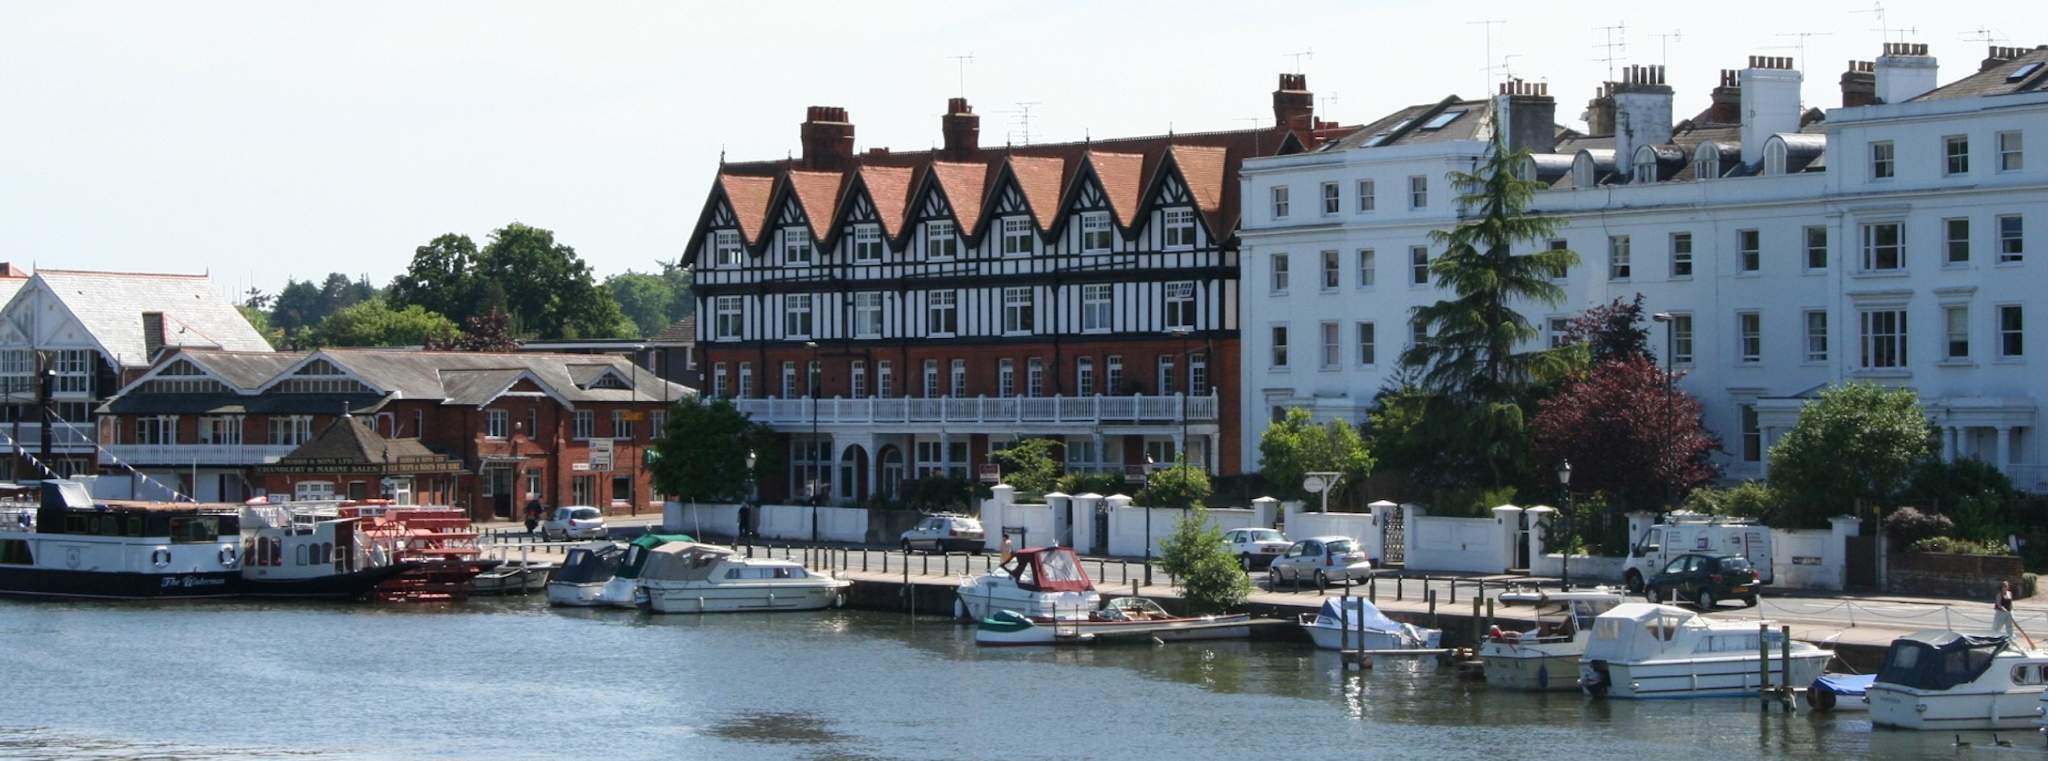 Royal Mansions, Station Road, Henley-on-Thames, Oxfordshire, RG9 1BB